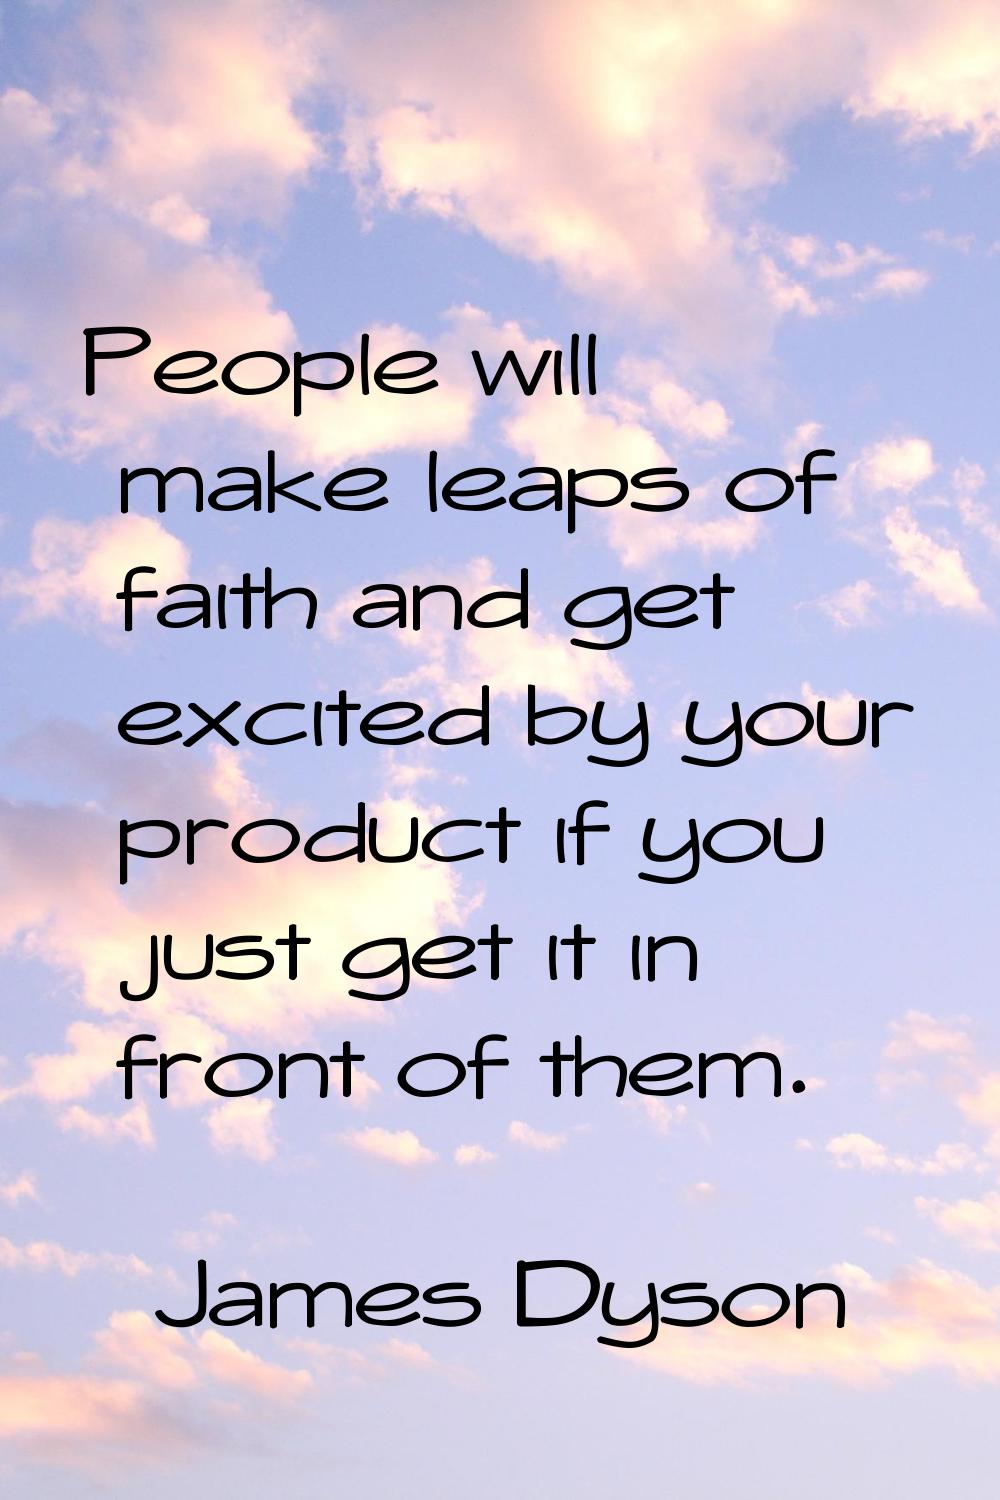 People will make leaps of faith and get excited by your product if you just get it in front of them